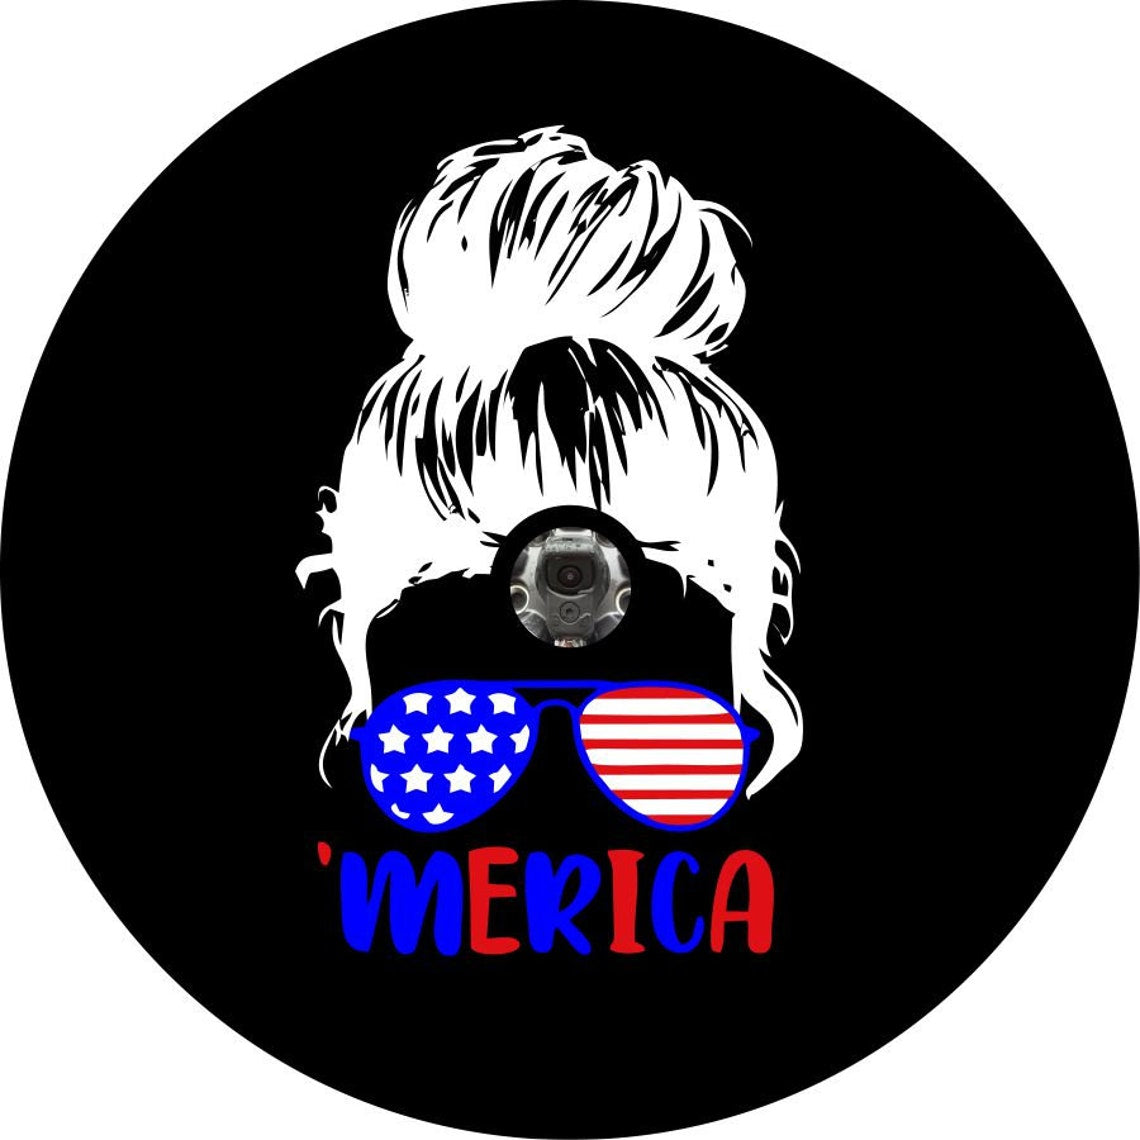 Silhouette of a girls head with a messy bun wearing sunglasses that are patriotic colors red, white and blue like the American flag and the word 'merica underneath in blue and red spare tire cover design for a black vinyl spare tire cover for Jeep, Bronco, RV, Camper, and more. Design is made for a tire cover in need of a back up camera